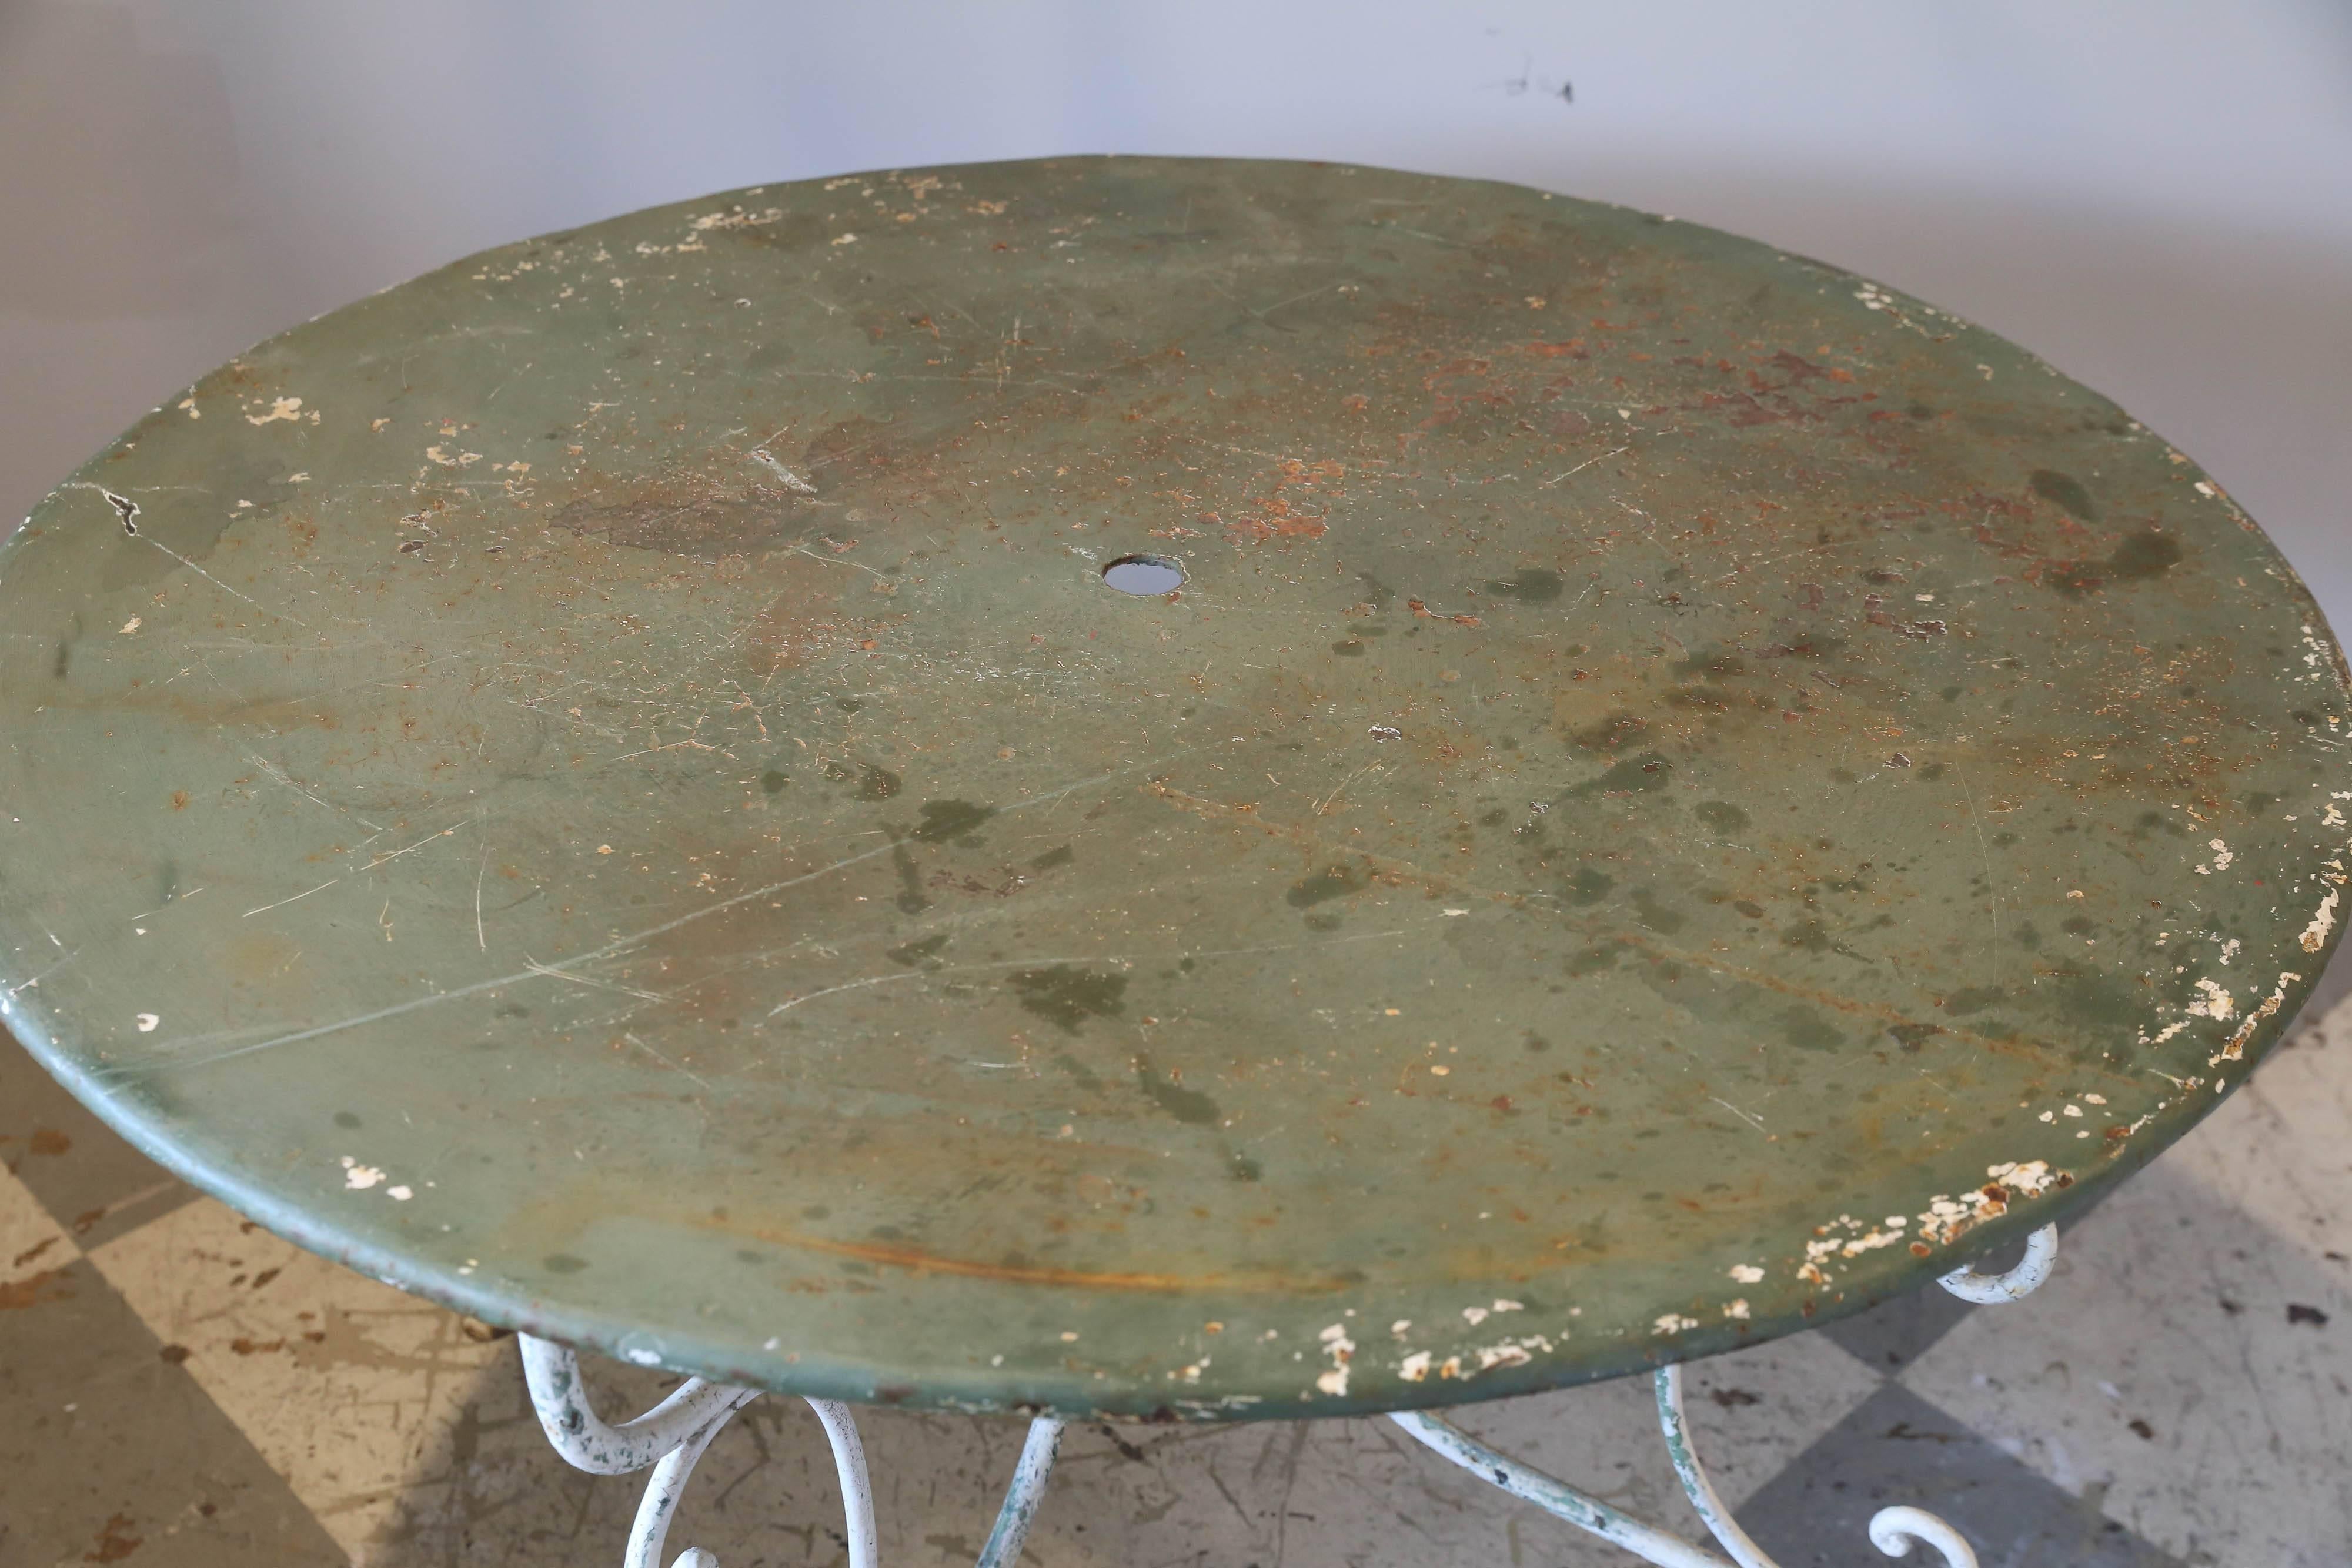 This is a rustic painted metal garden table we sourced in northern France. The base is painted an off-white color with some light green as well as the rust color of the metal underneath. The top is painted in a medium green. The centre of the top